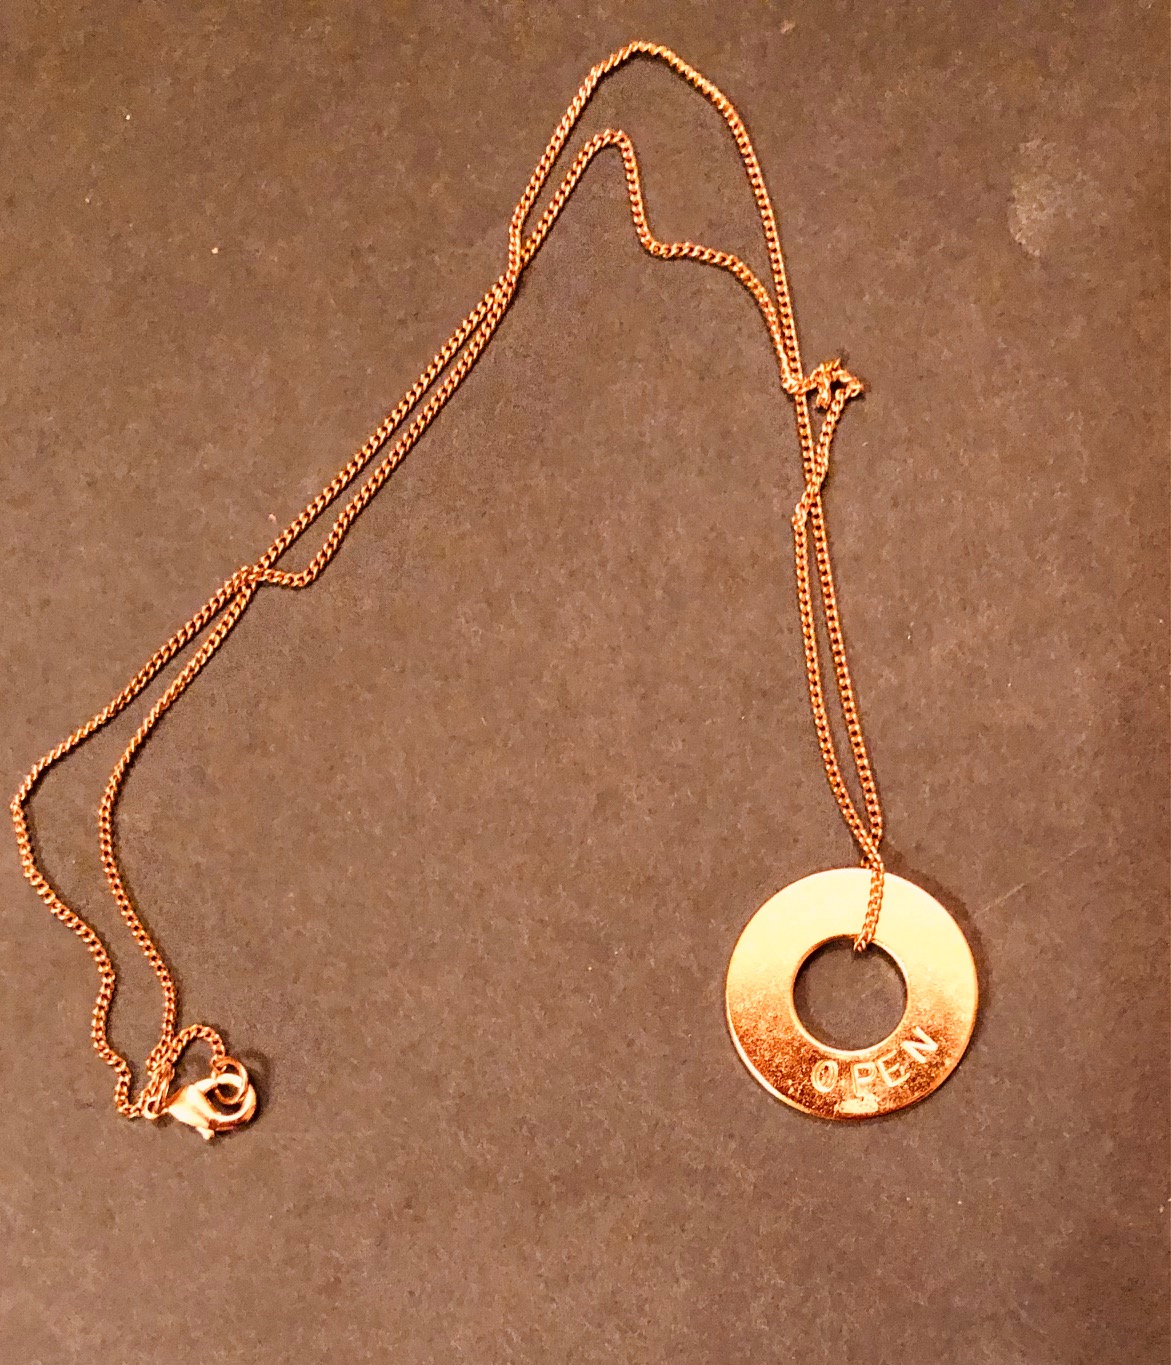 Photo of Gretchen's "Open" necklace